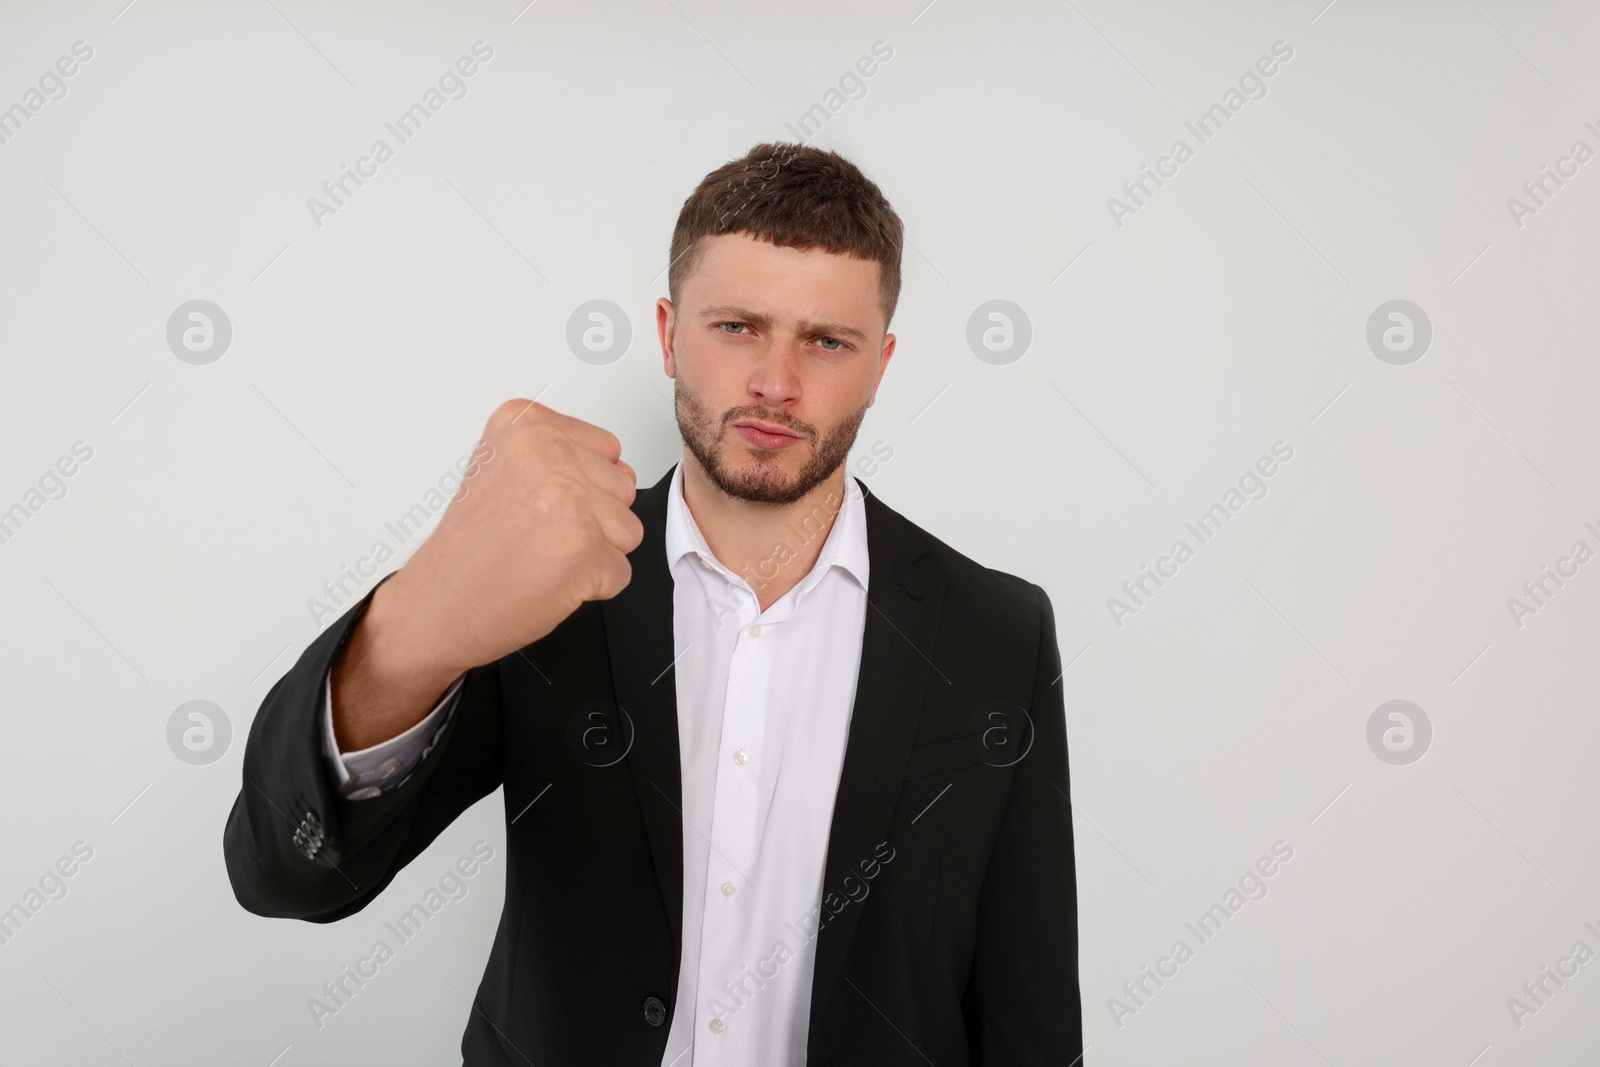 Photo of Aggressive young man showing fist on white background